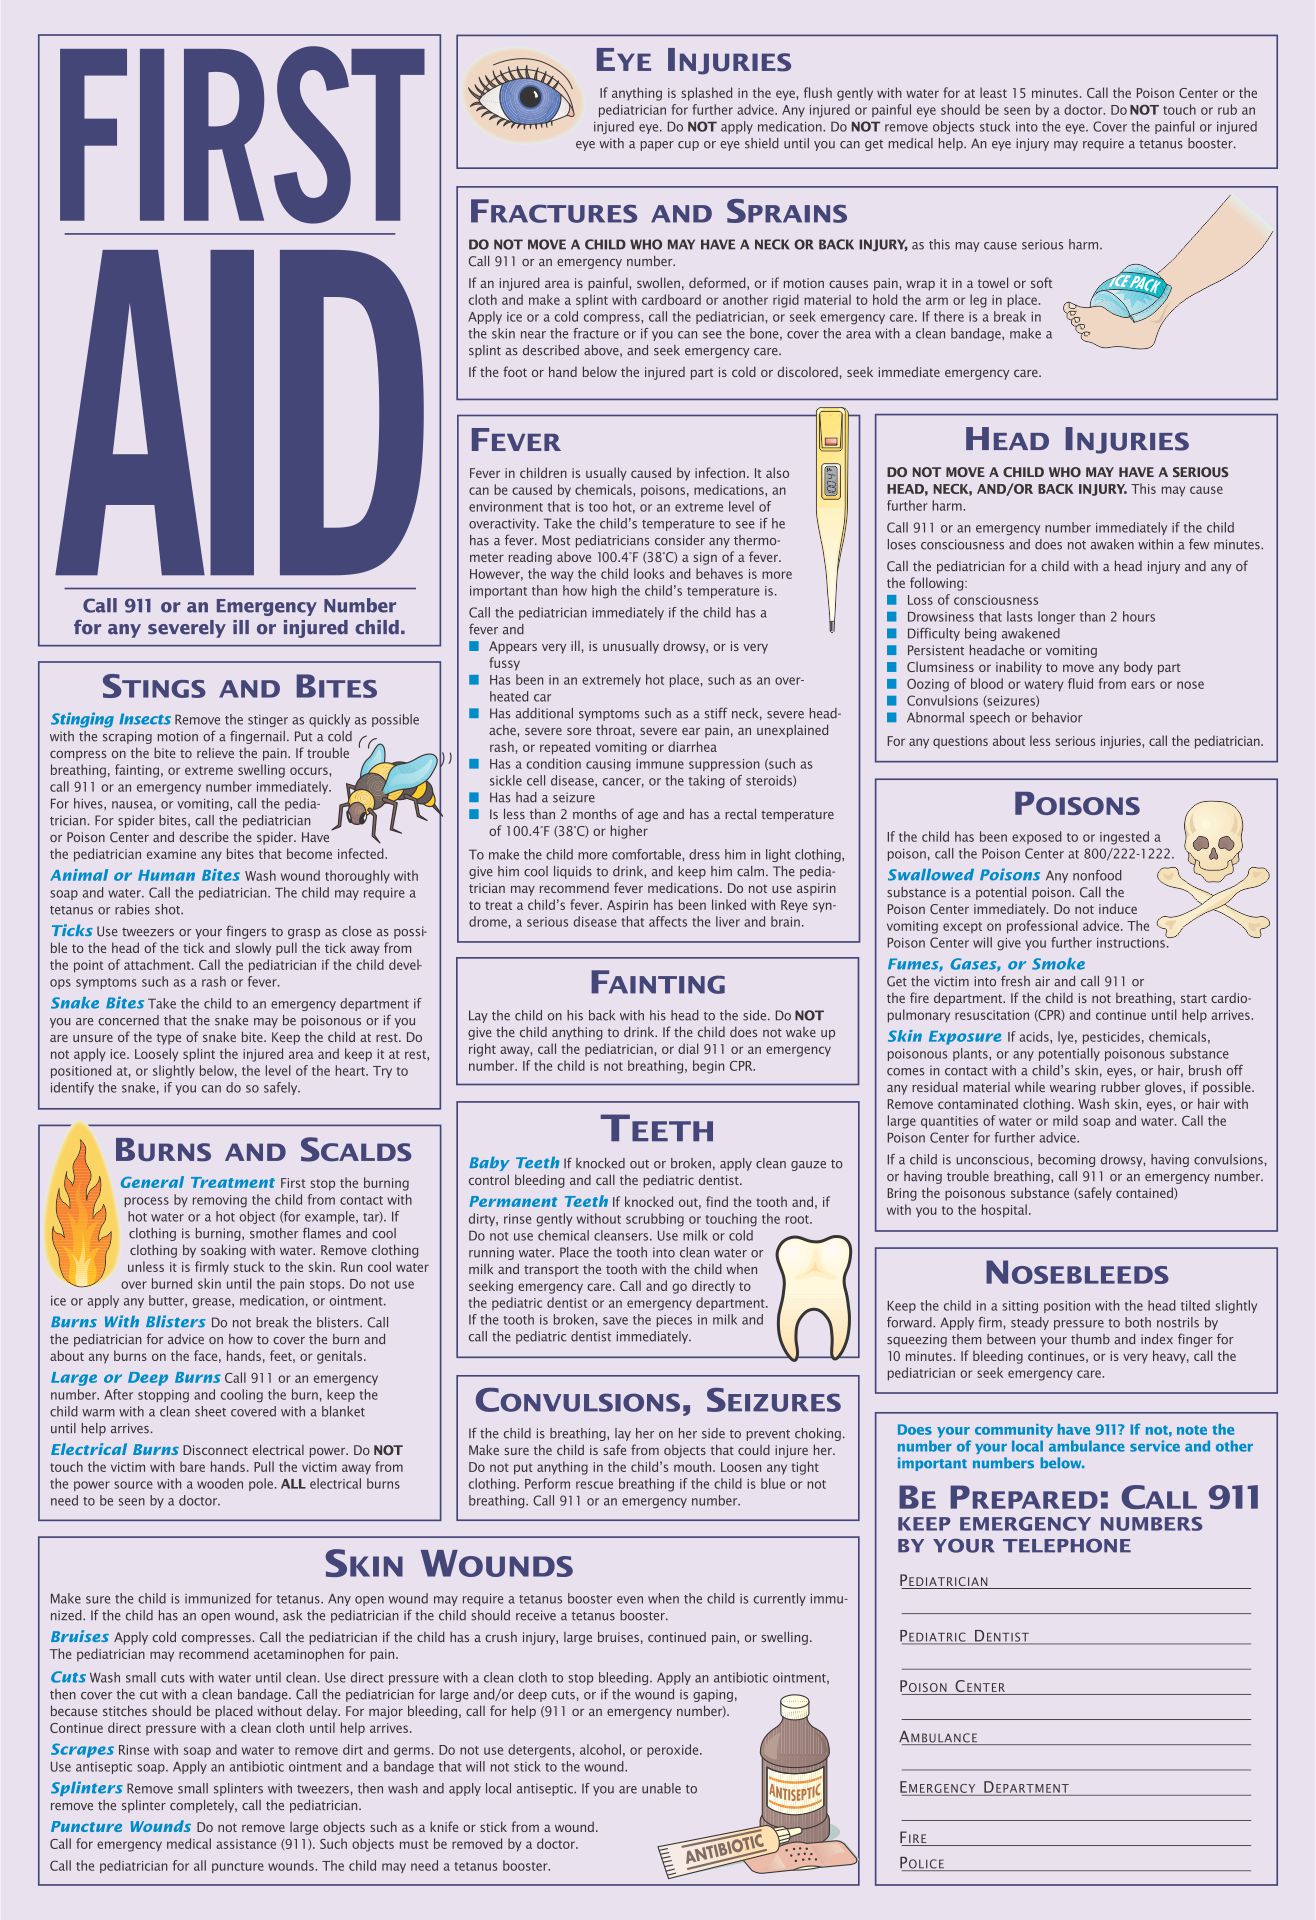 8-best-images-of-first-aid-manual-printable-first-aid-guide-printable